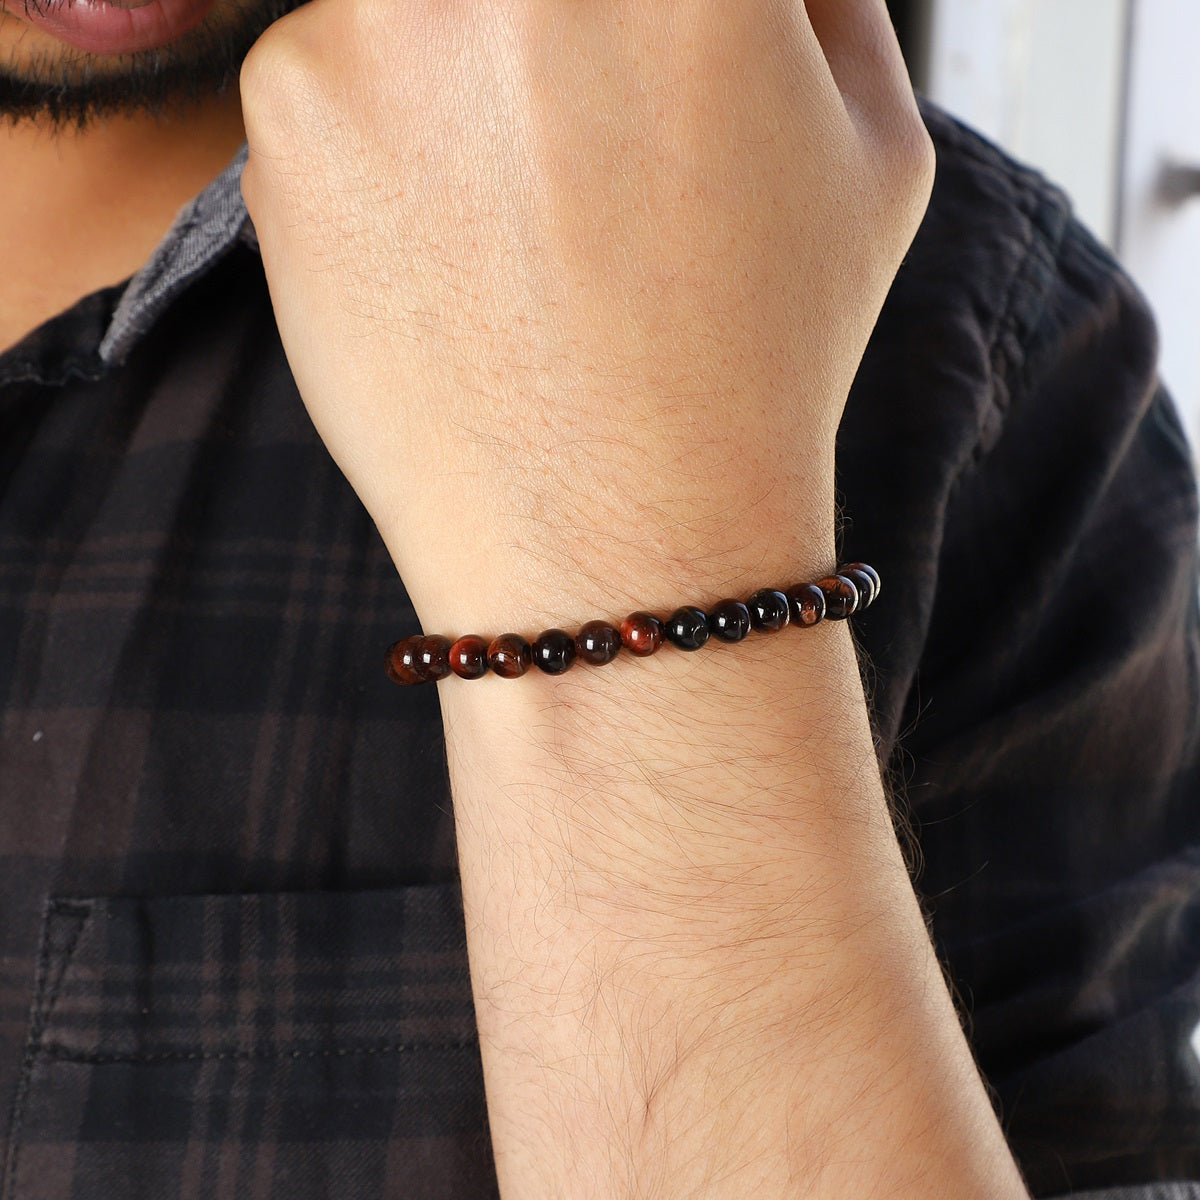 Stylish view of the Red Tiger's Eye Bracelet with 6mm smooth round beads, radiating courage and empowerment for a fashionable and bold accessory